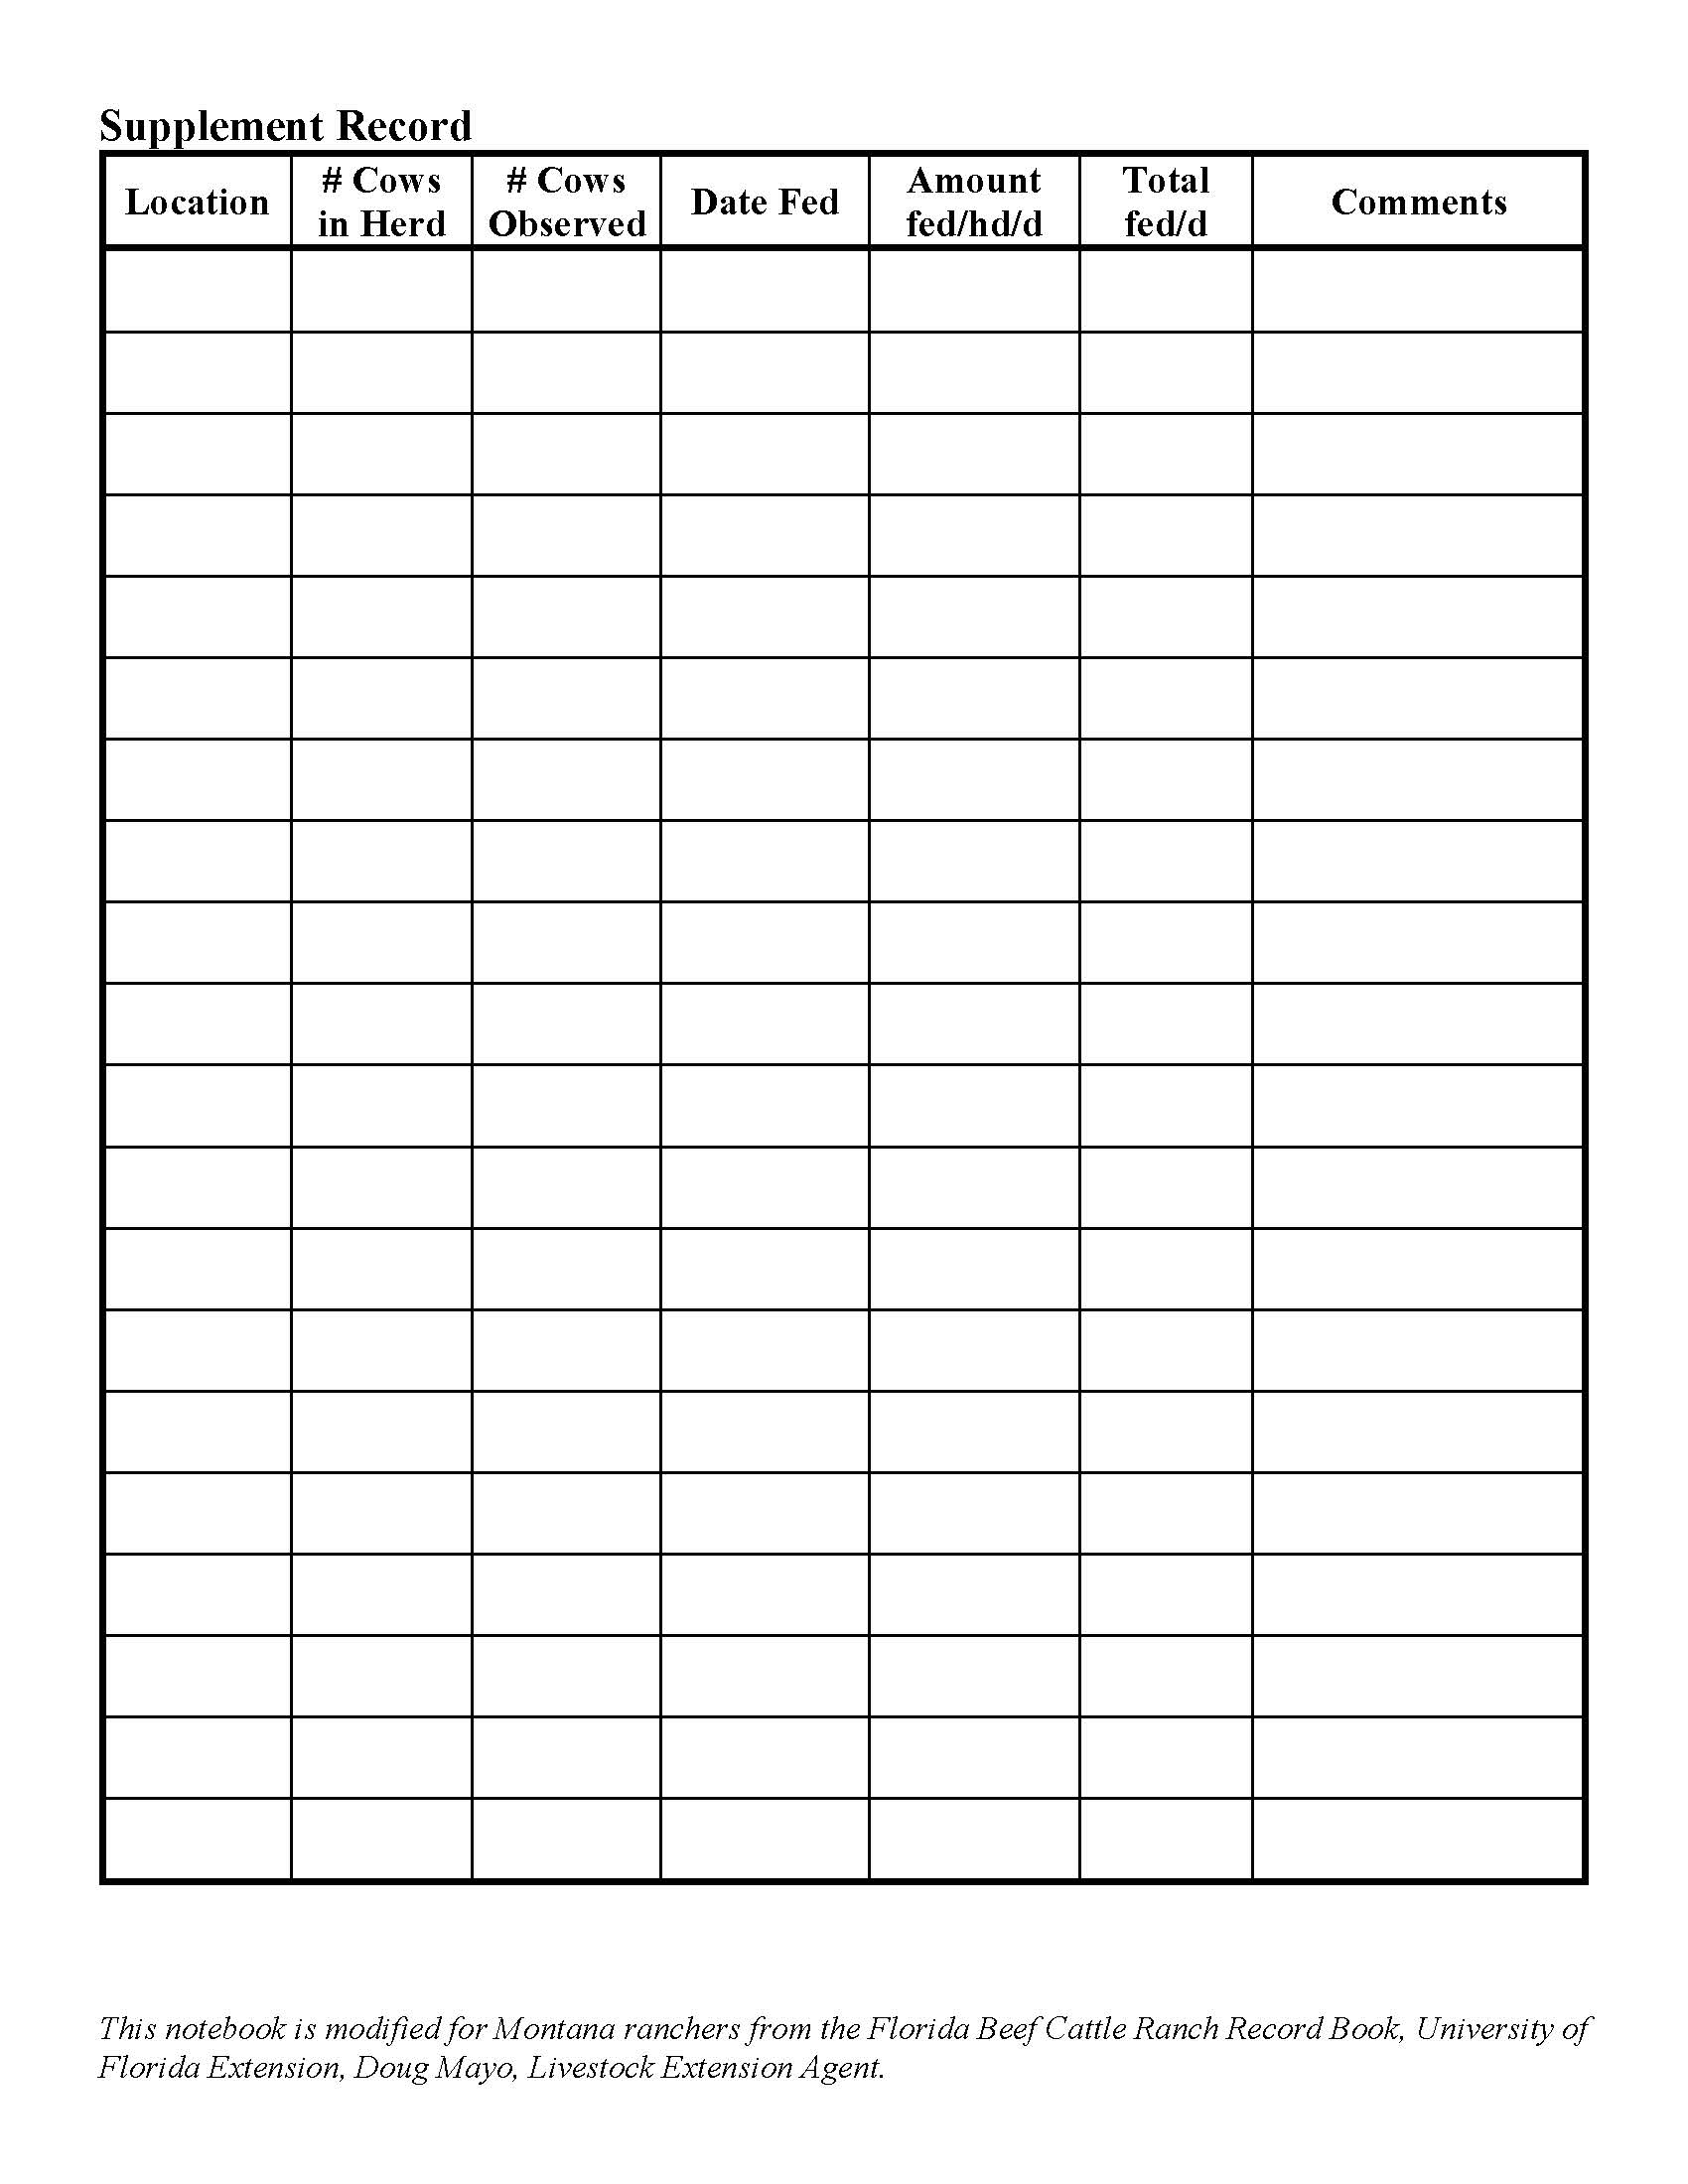 A sample table for keeping records on supplements. Used in the rancher notebook.